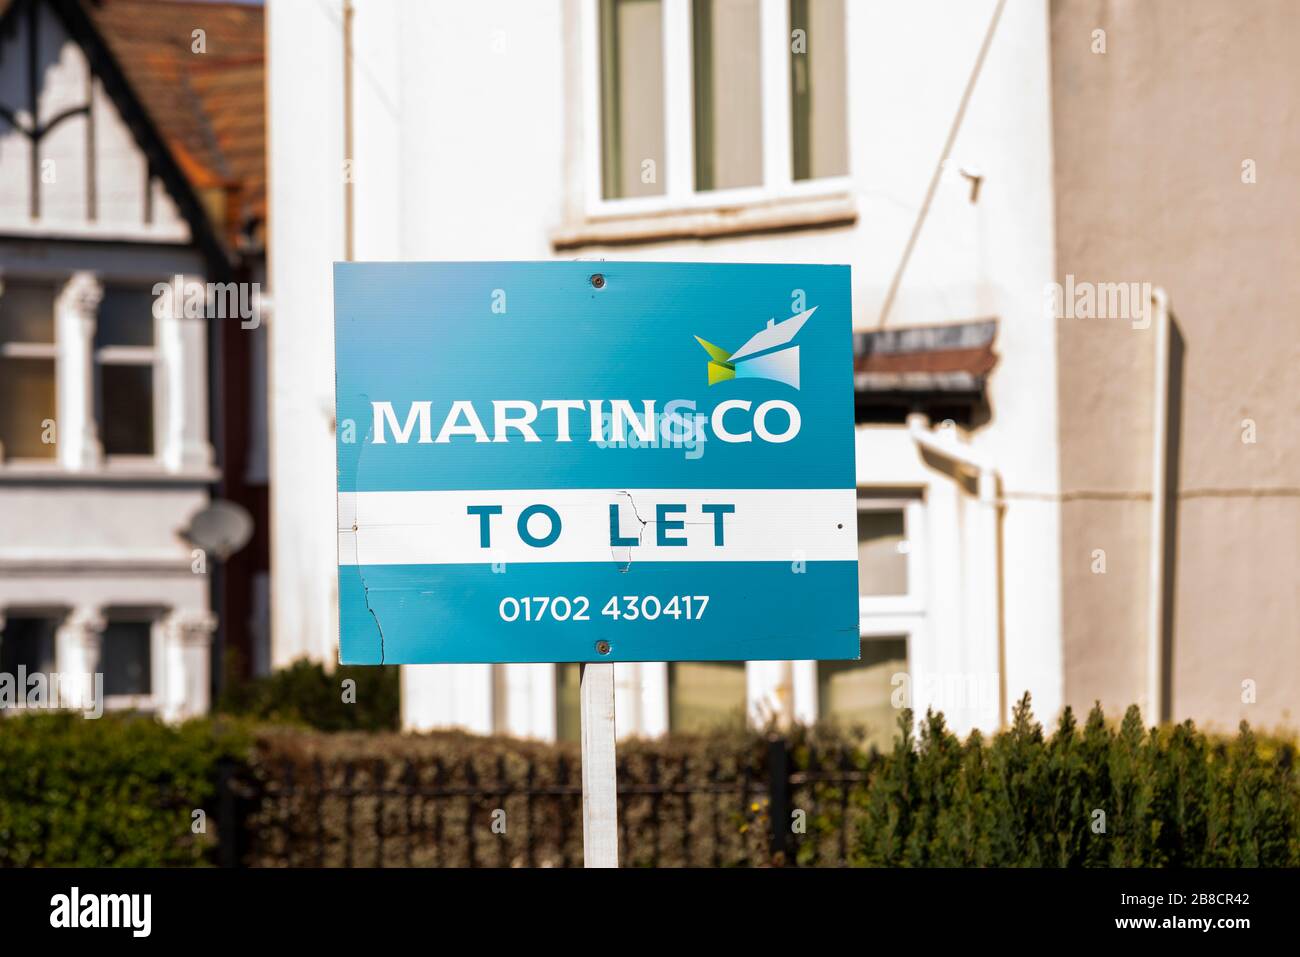 Martin & Co lettings and estate agents business sign board outside property home in Westcliff on Sea, Essex, UK. To Let sign. Estate agency Stock Photo